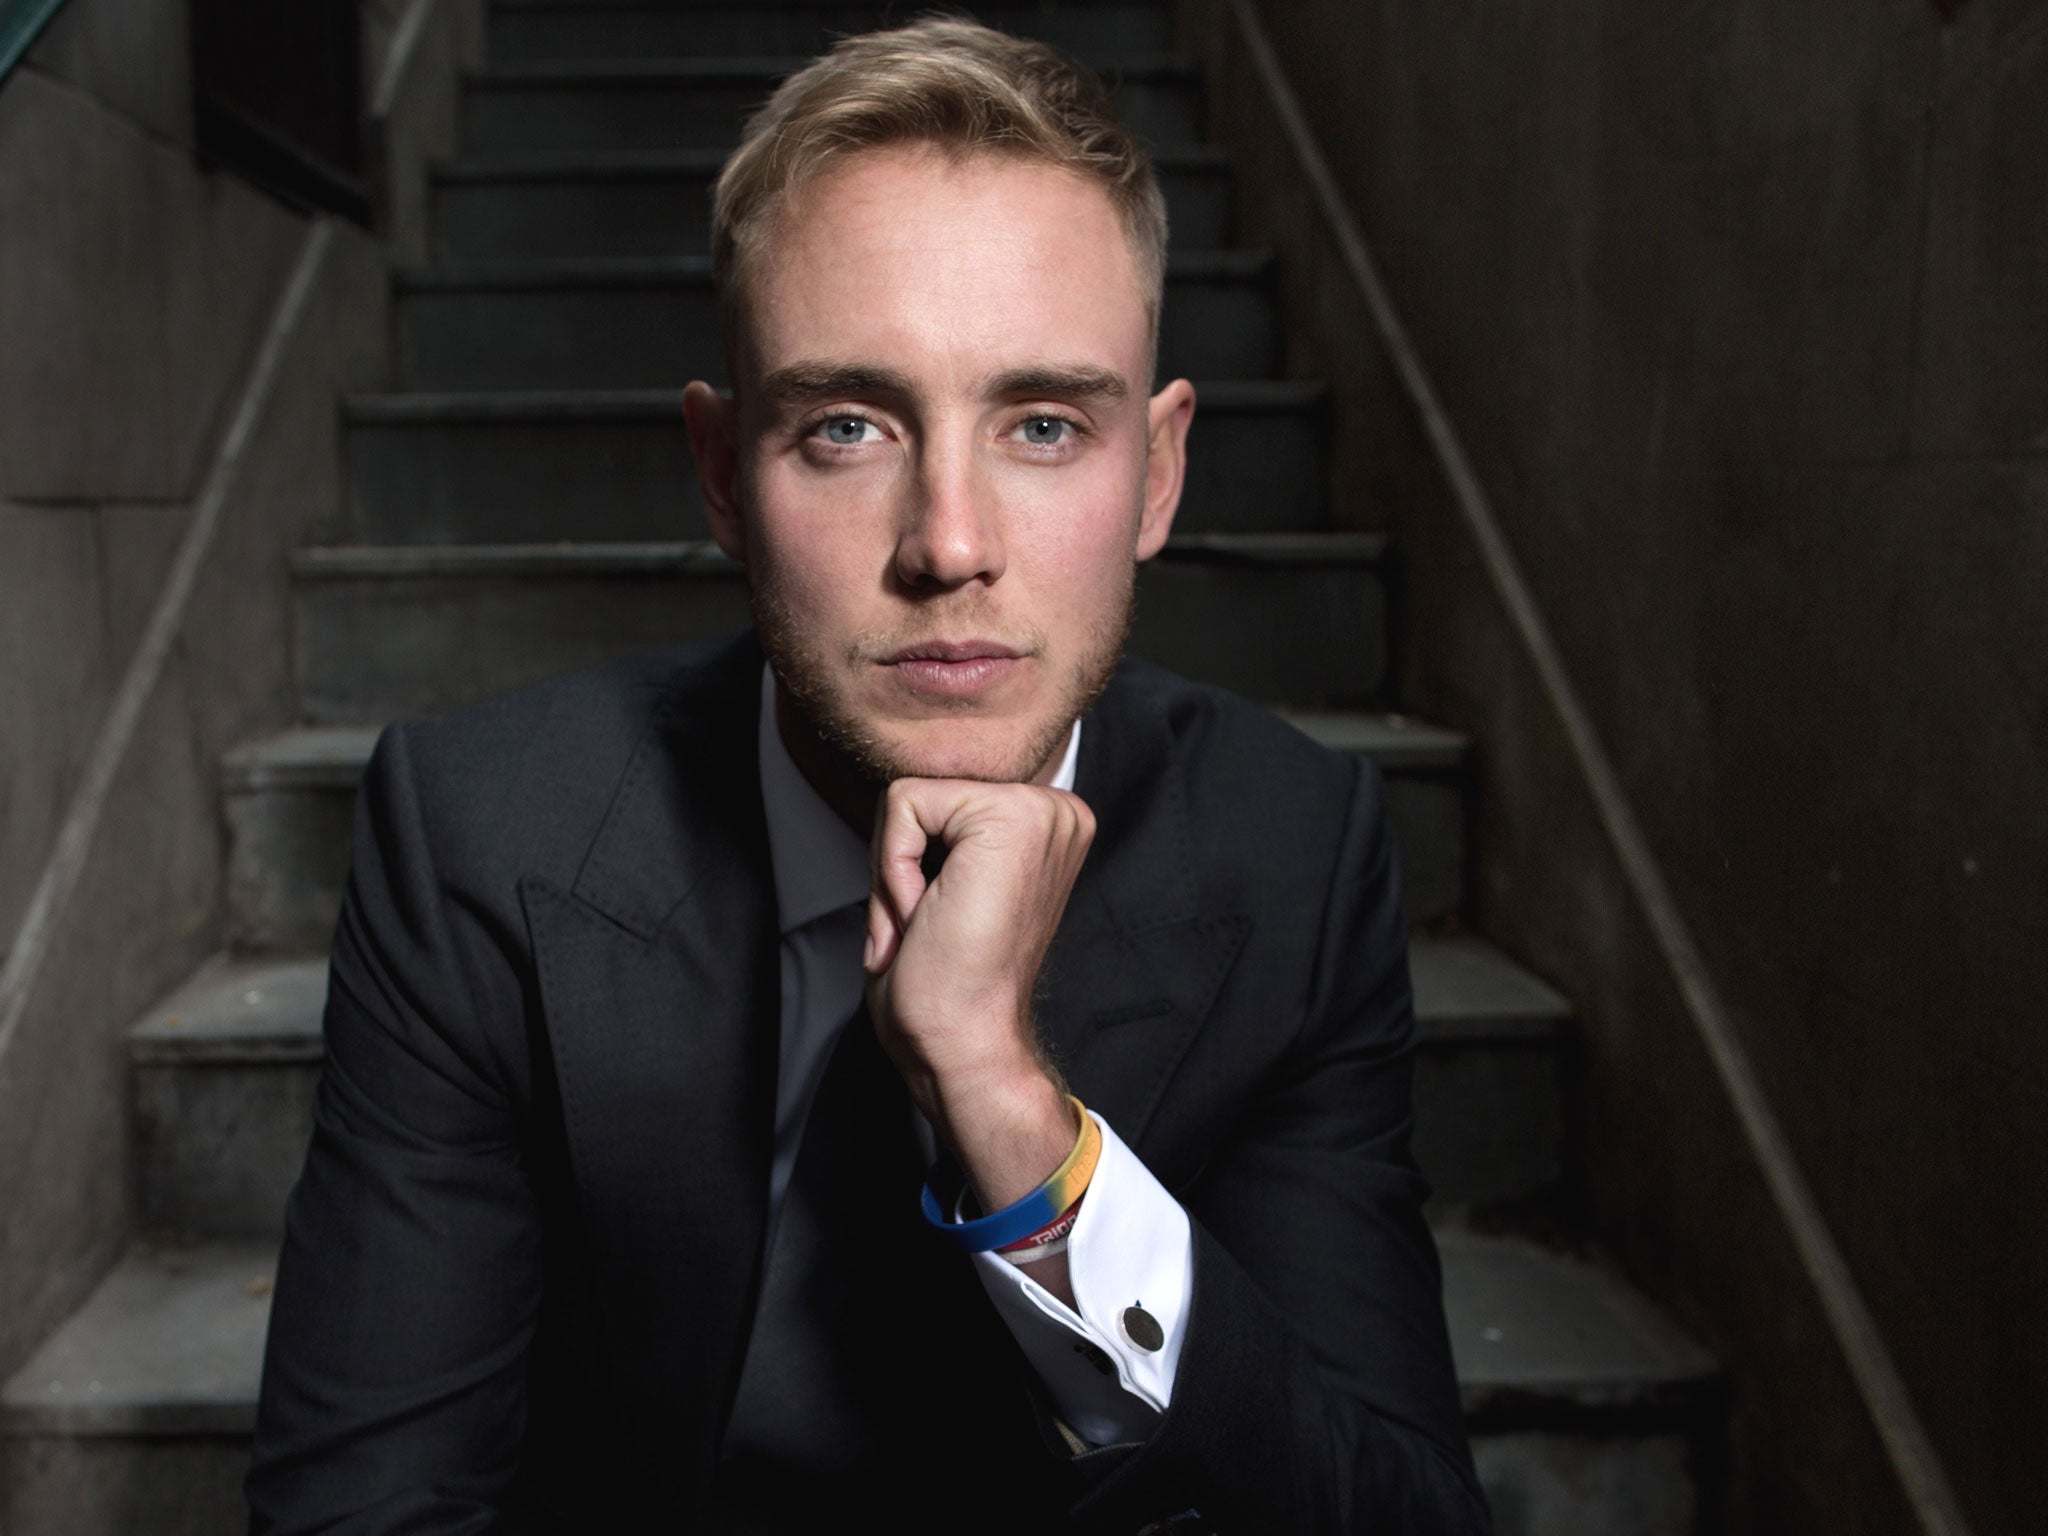 On the way up: 'It excited me, just thinking about how much improvement there could be in my game,' says Stuart Broad